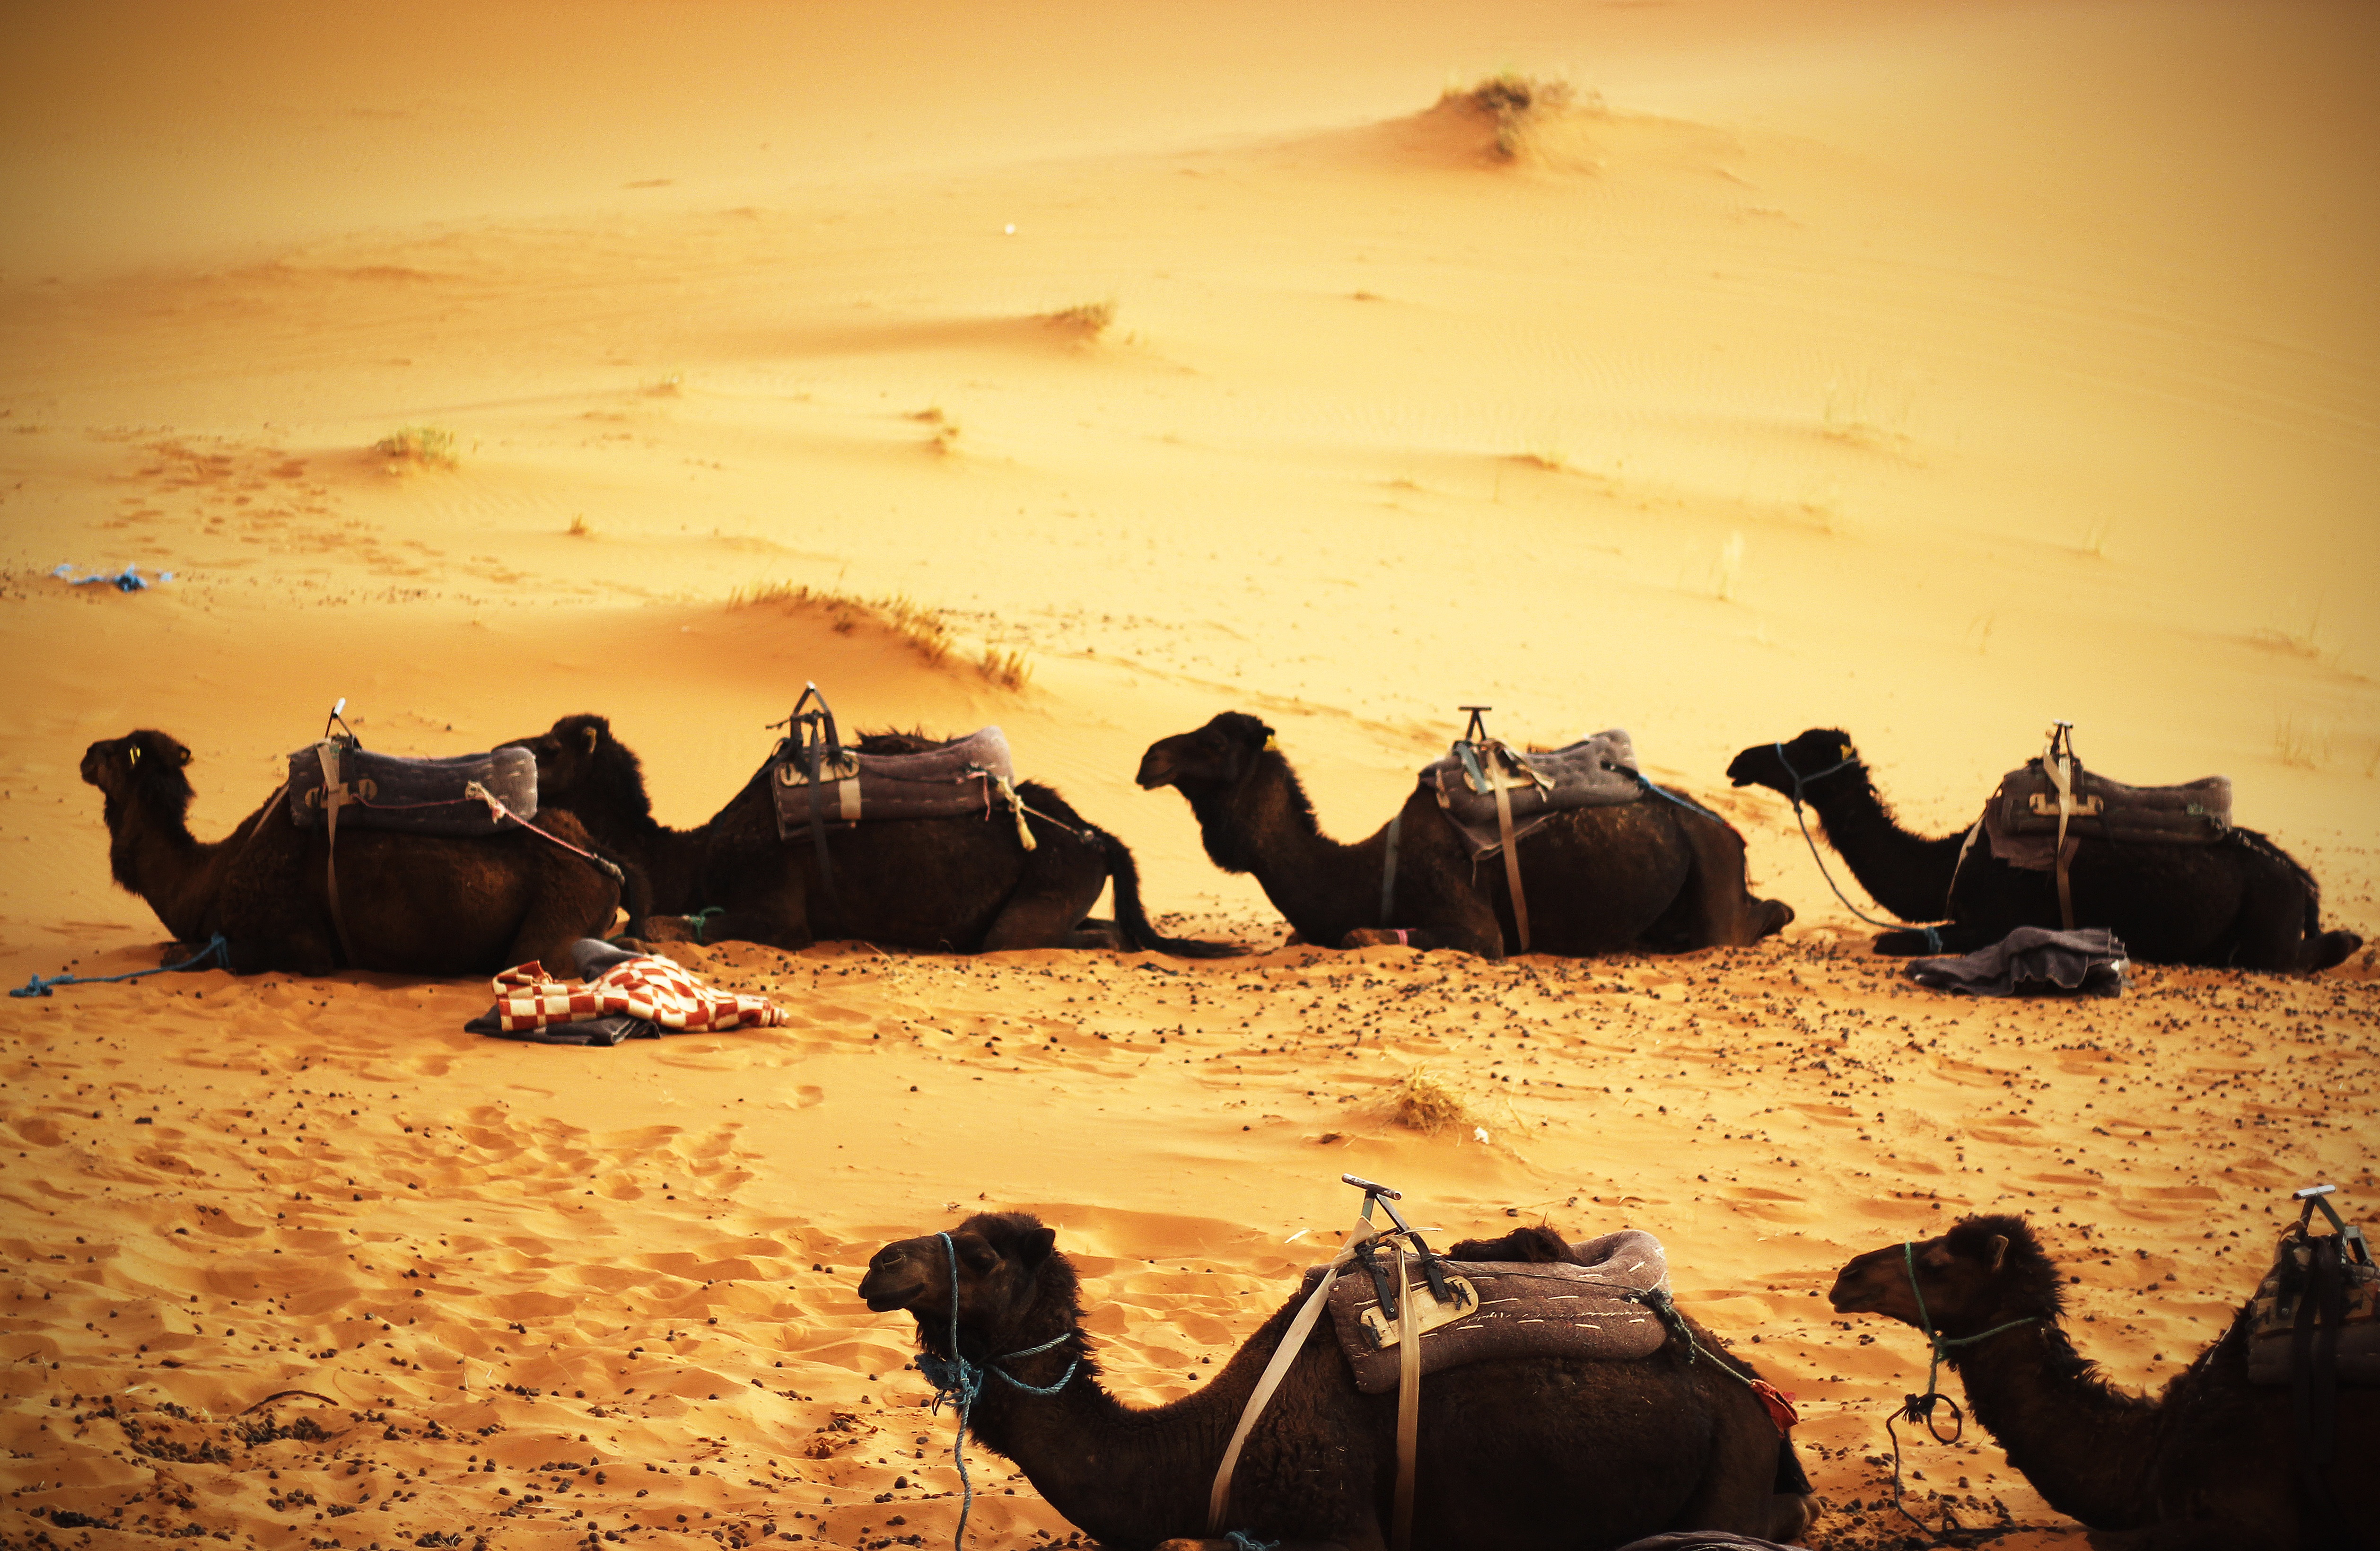 Group of camels photo